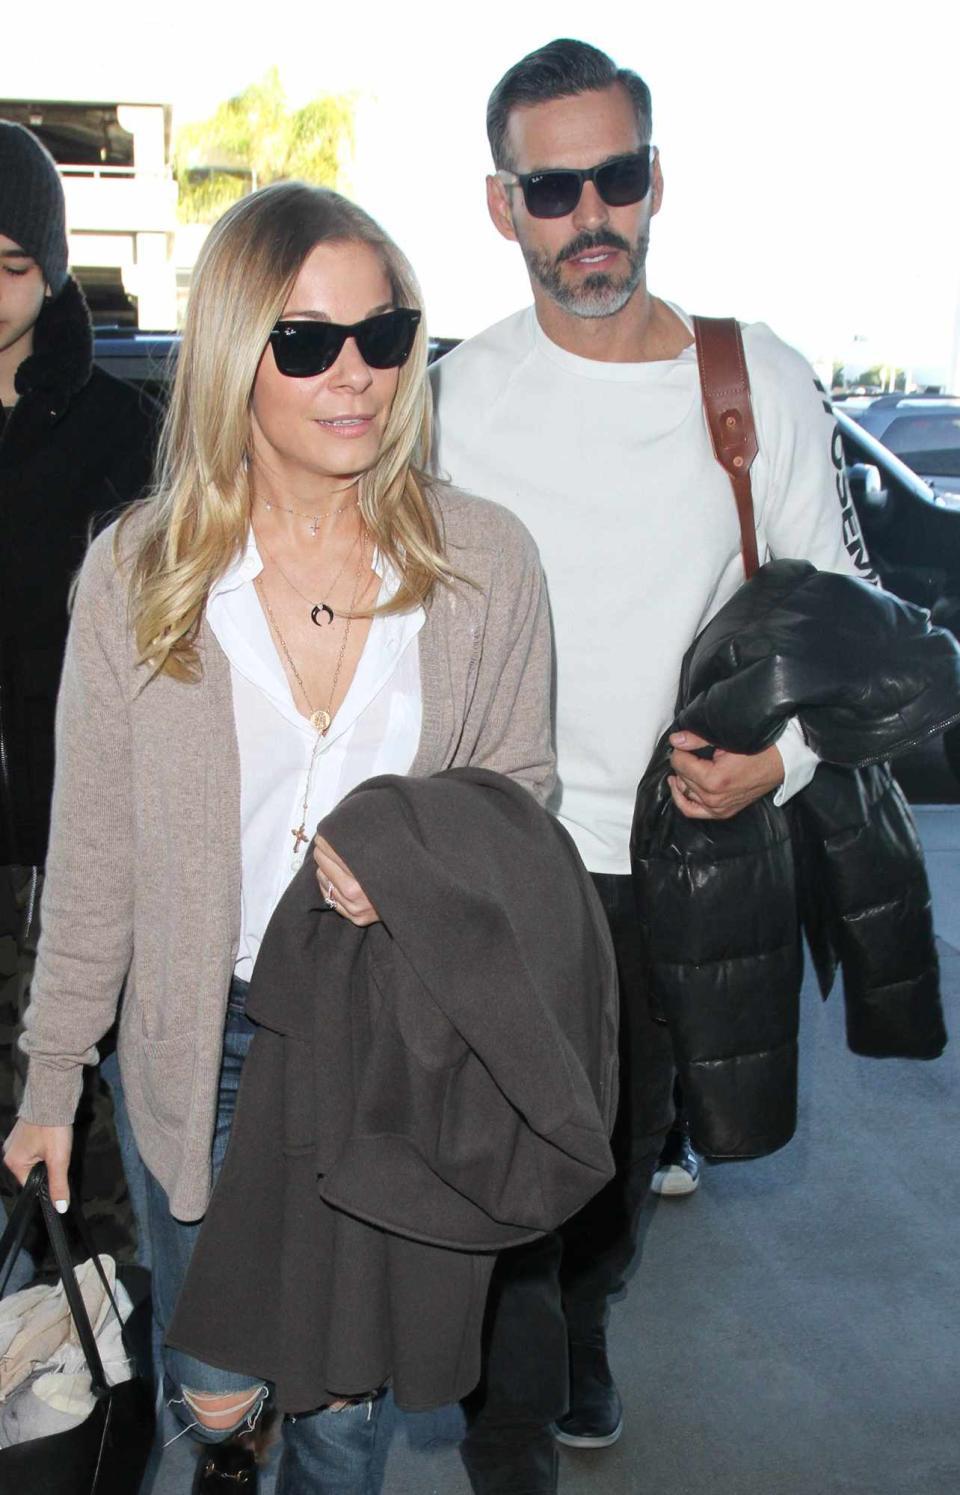 LeAnn Rimes and Eddie Cibrian are seen at LAX on December 28, 2016 in Los Angeles, California